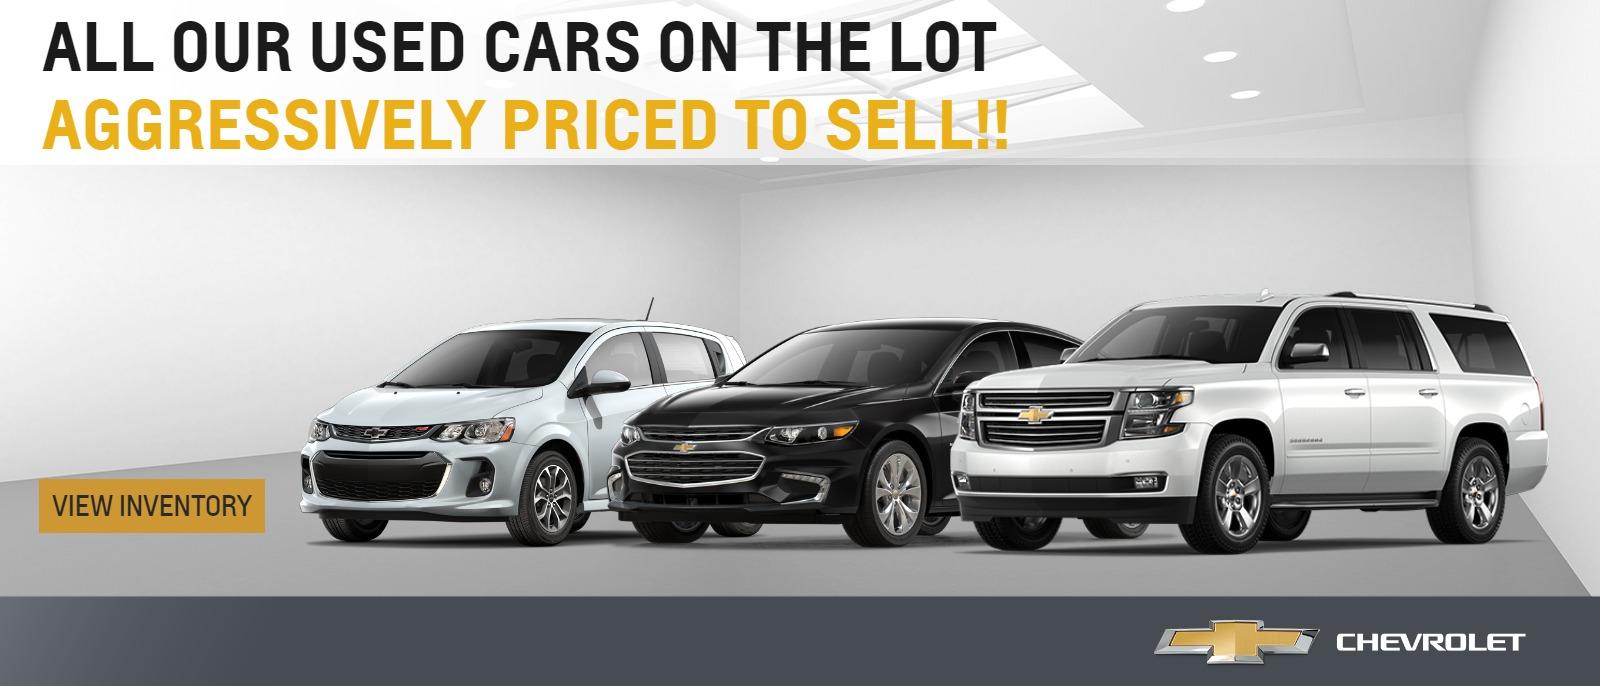 All our Used Cars